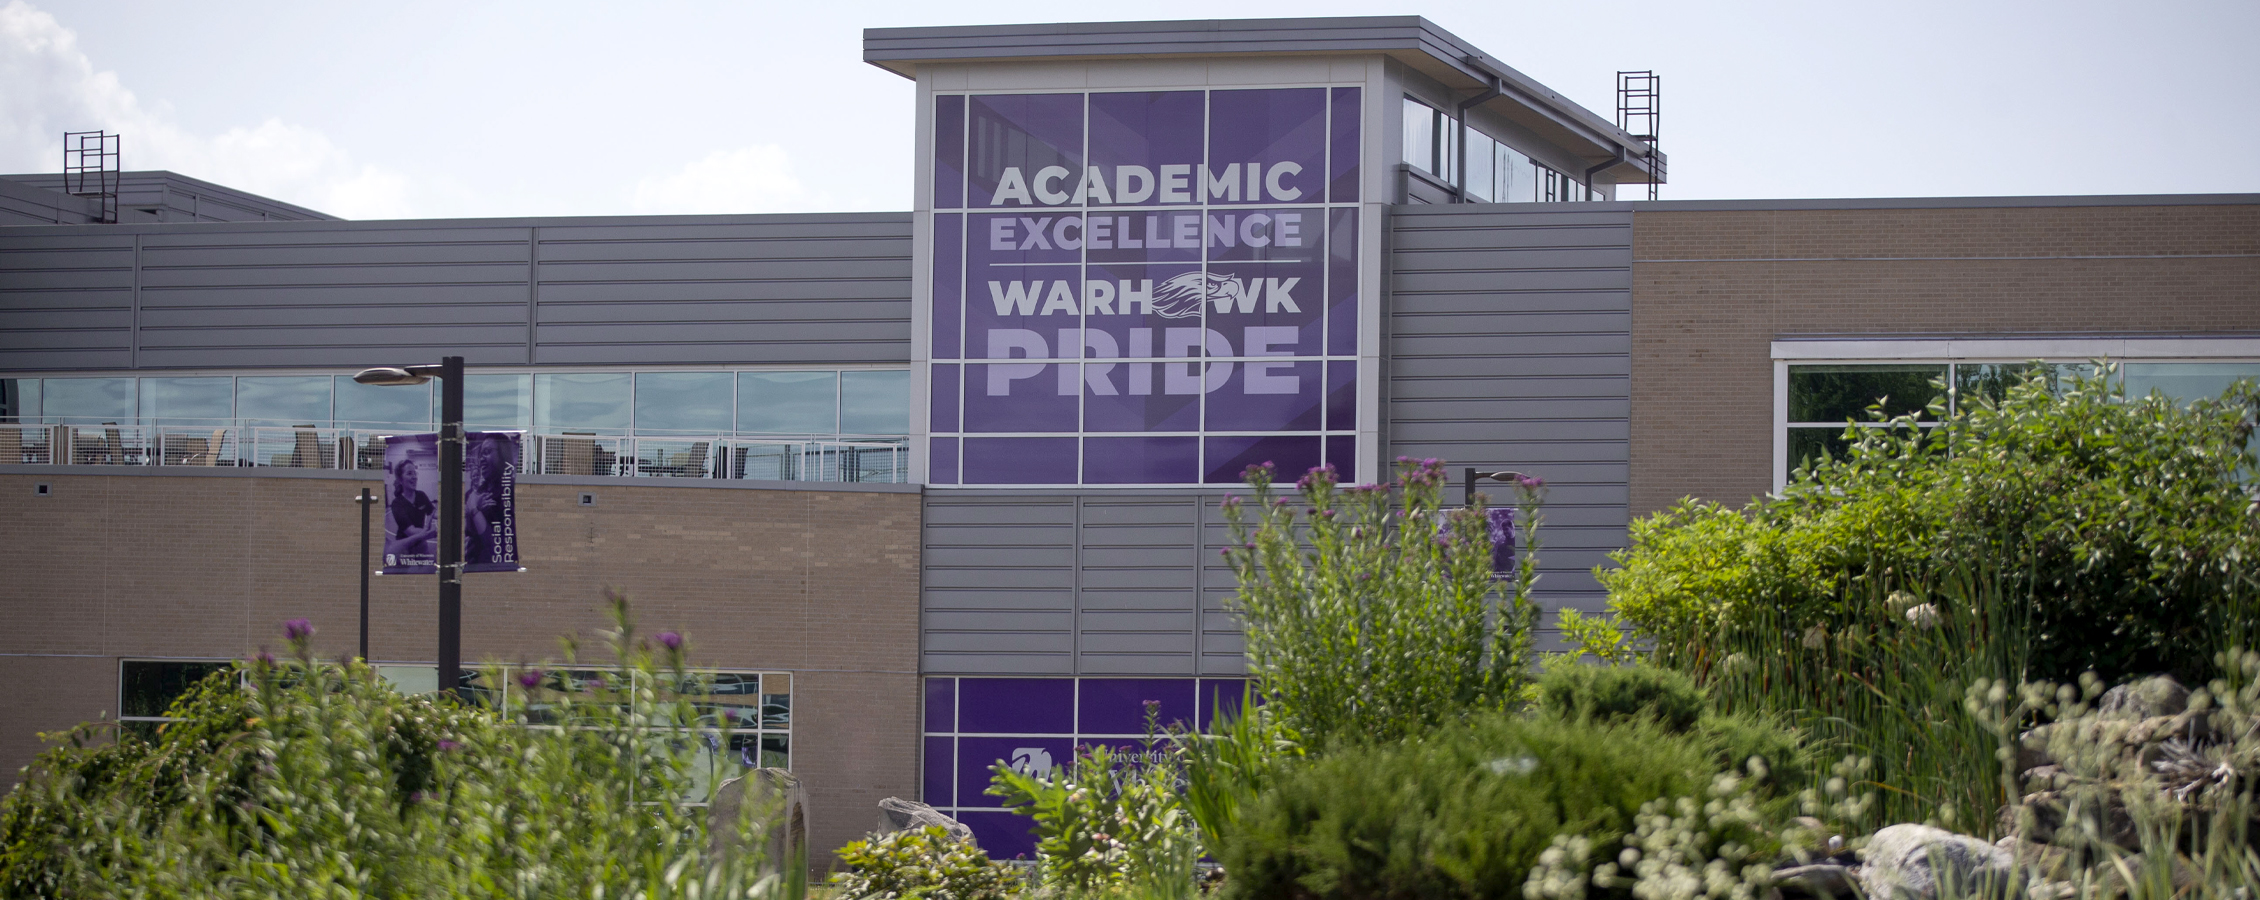 The University Center with a purple banner that says Academic Excellence and Warhawk Pride.